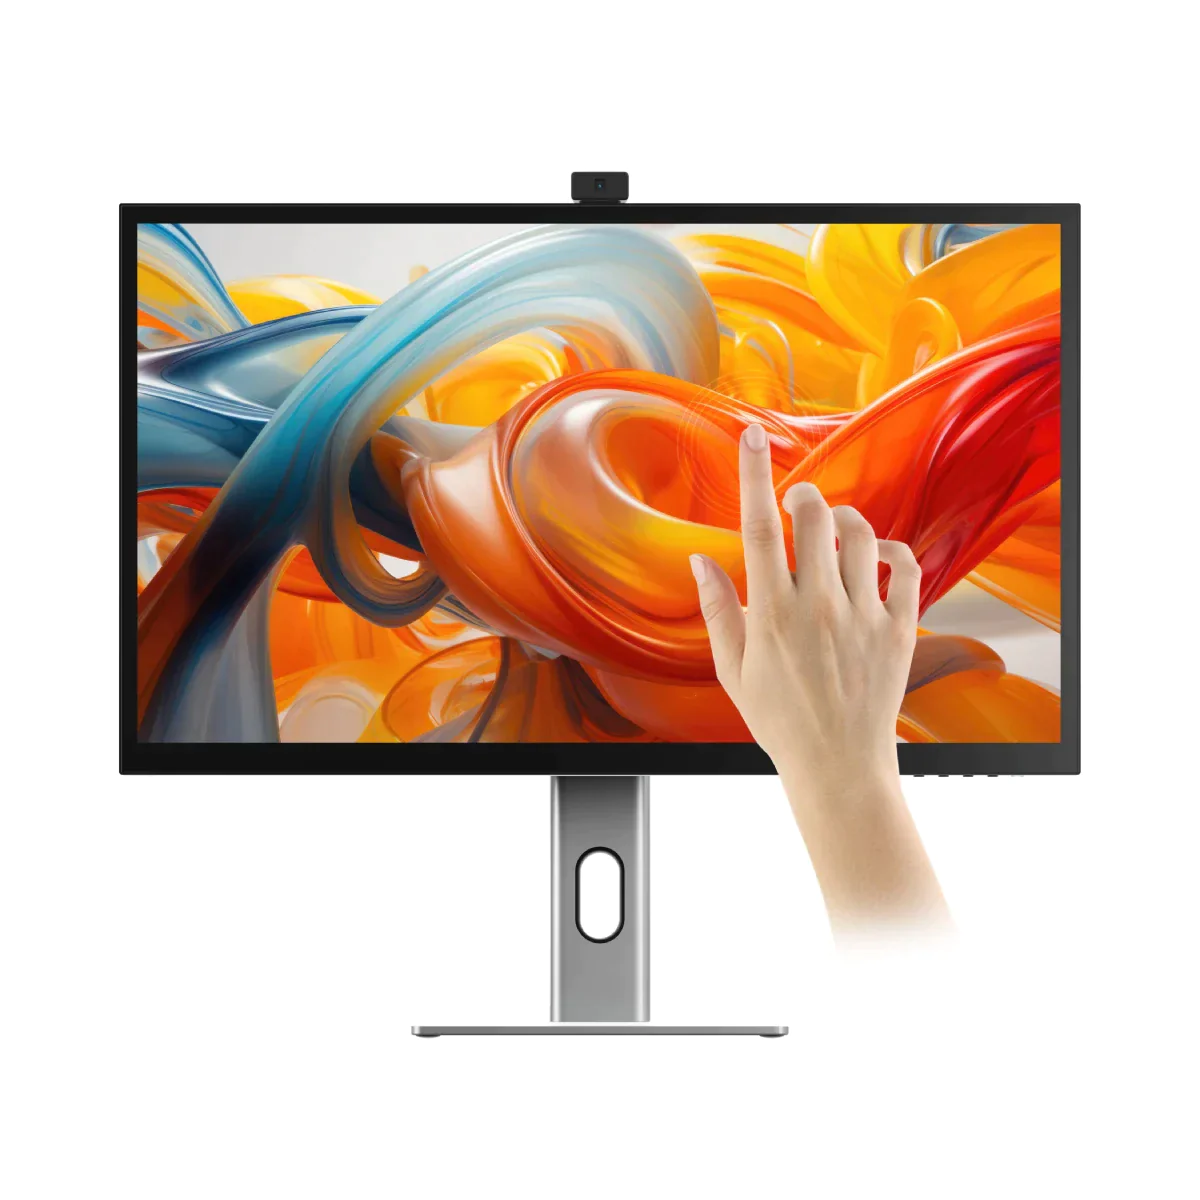 CLARITY 27" UHD 4K Monitor + Clarity Pro Touch 27" UHD 4K Monitor with 65W PD, Webcam and Touchscreen + Thunderbolt 4 BLAZE Docking Station